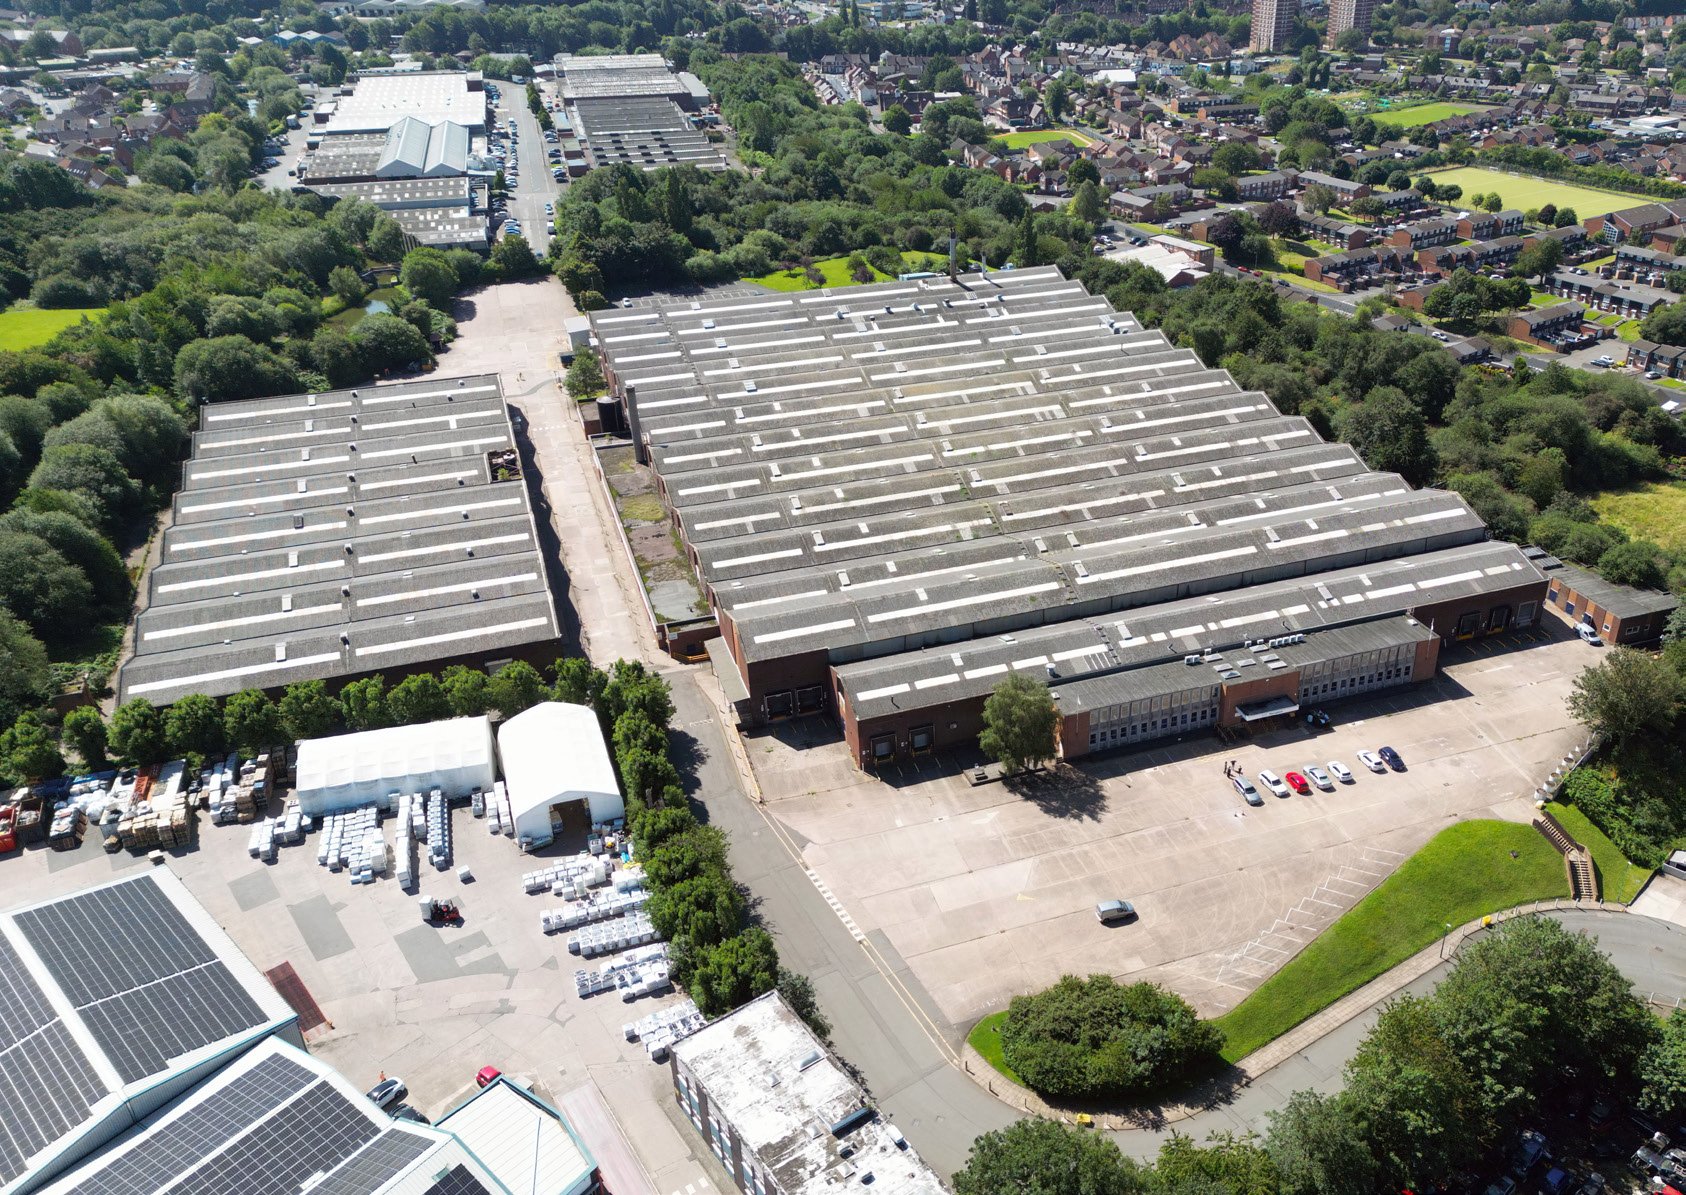 Bidwells Completes Sale of 20-acre Birmingham Site to Auctioneer